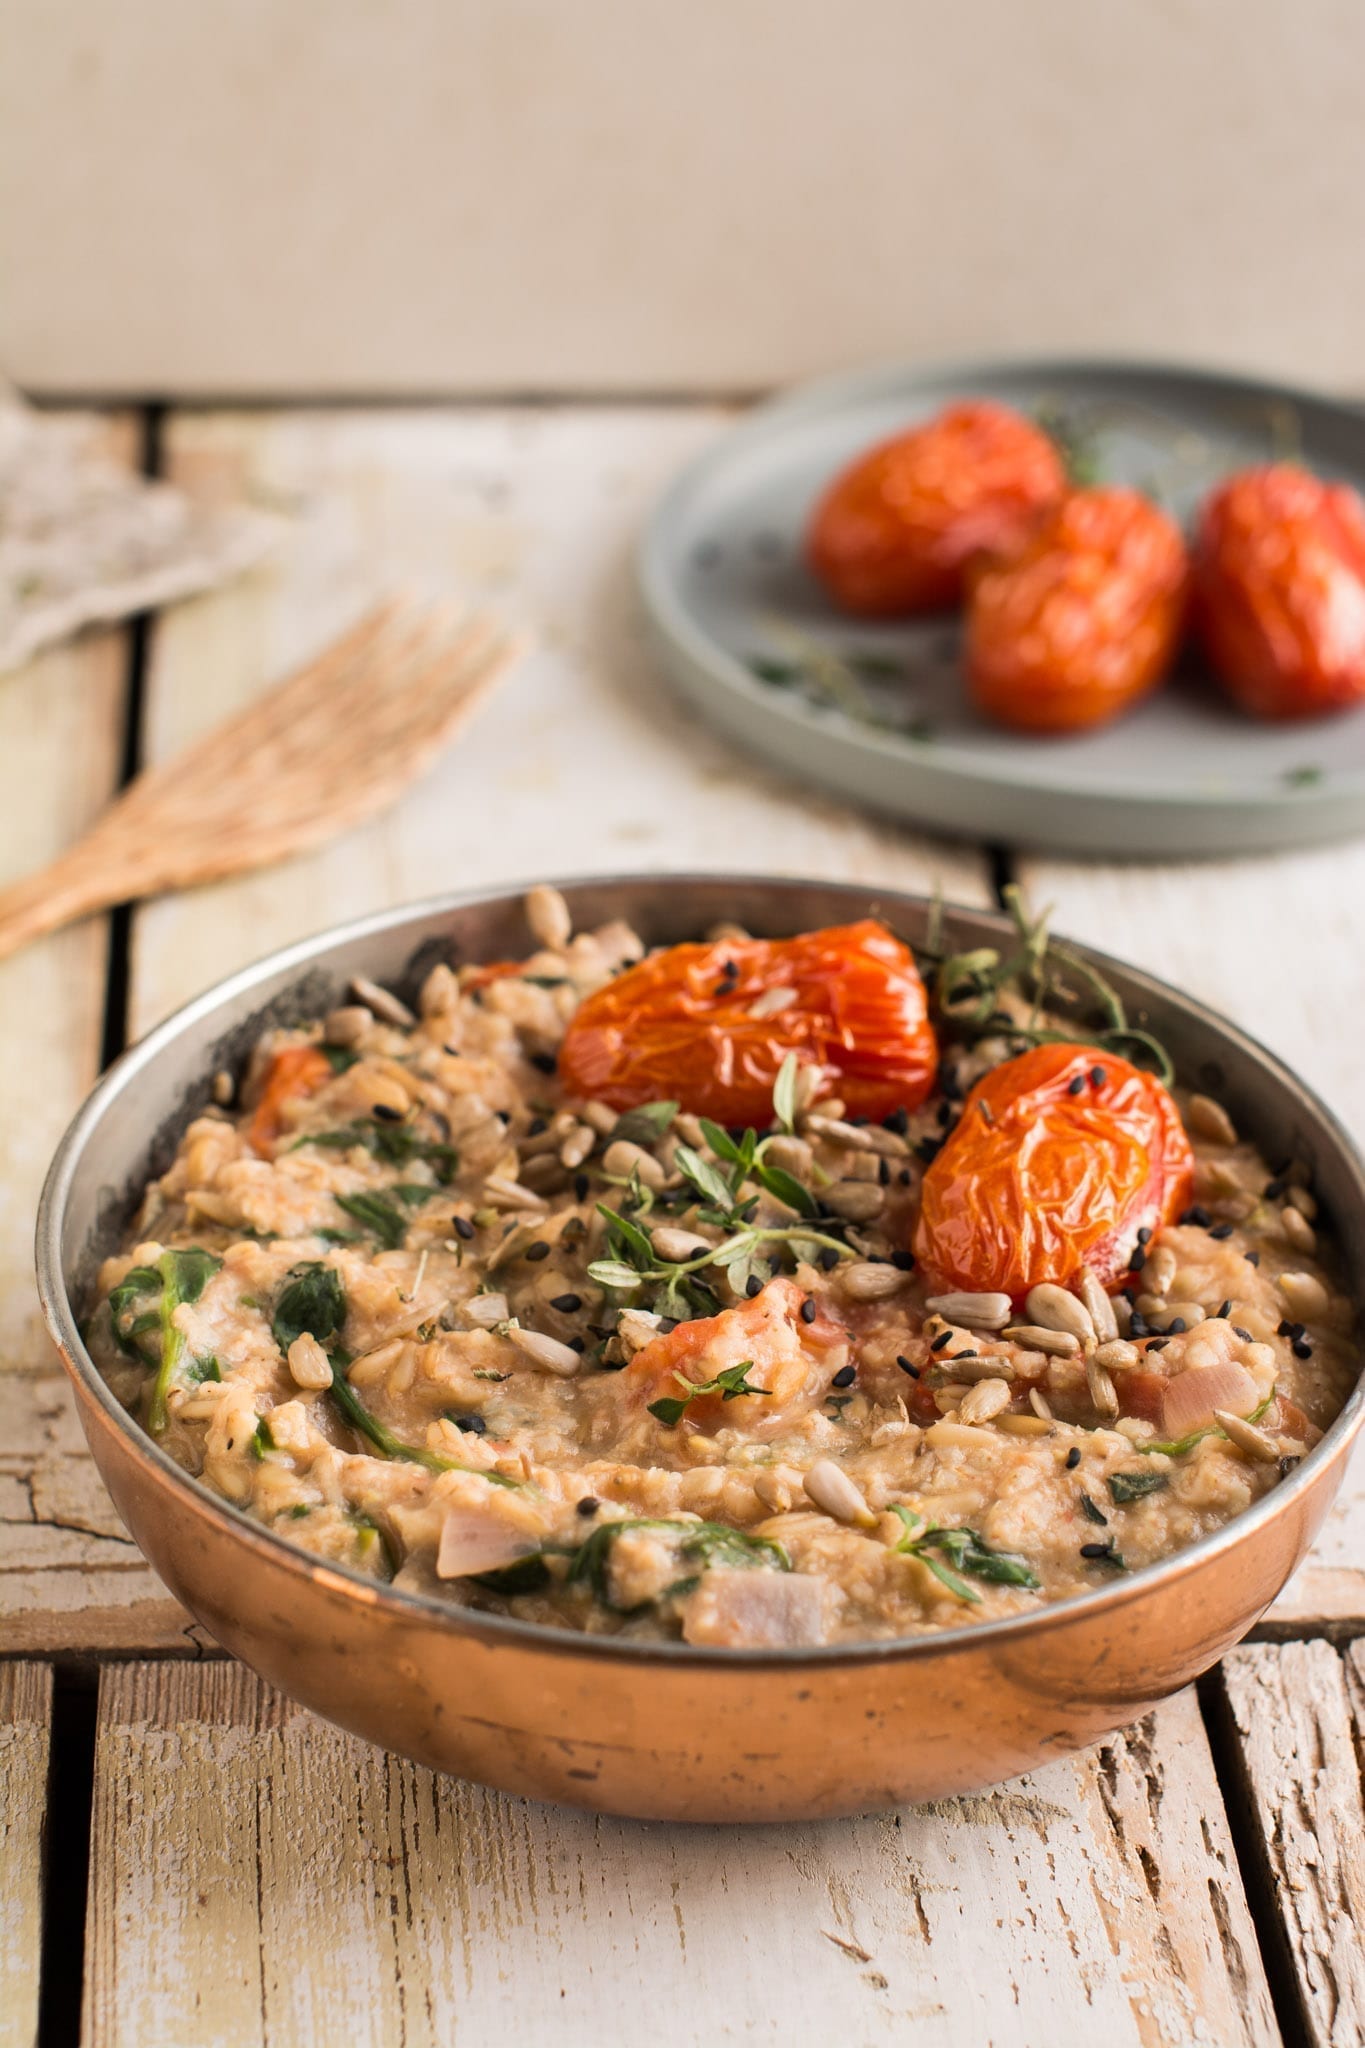 This delicious savory oatmeal is full of Mediterranean flavours and nutrients that your body will appreciate in the morning.